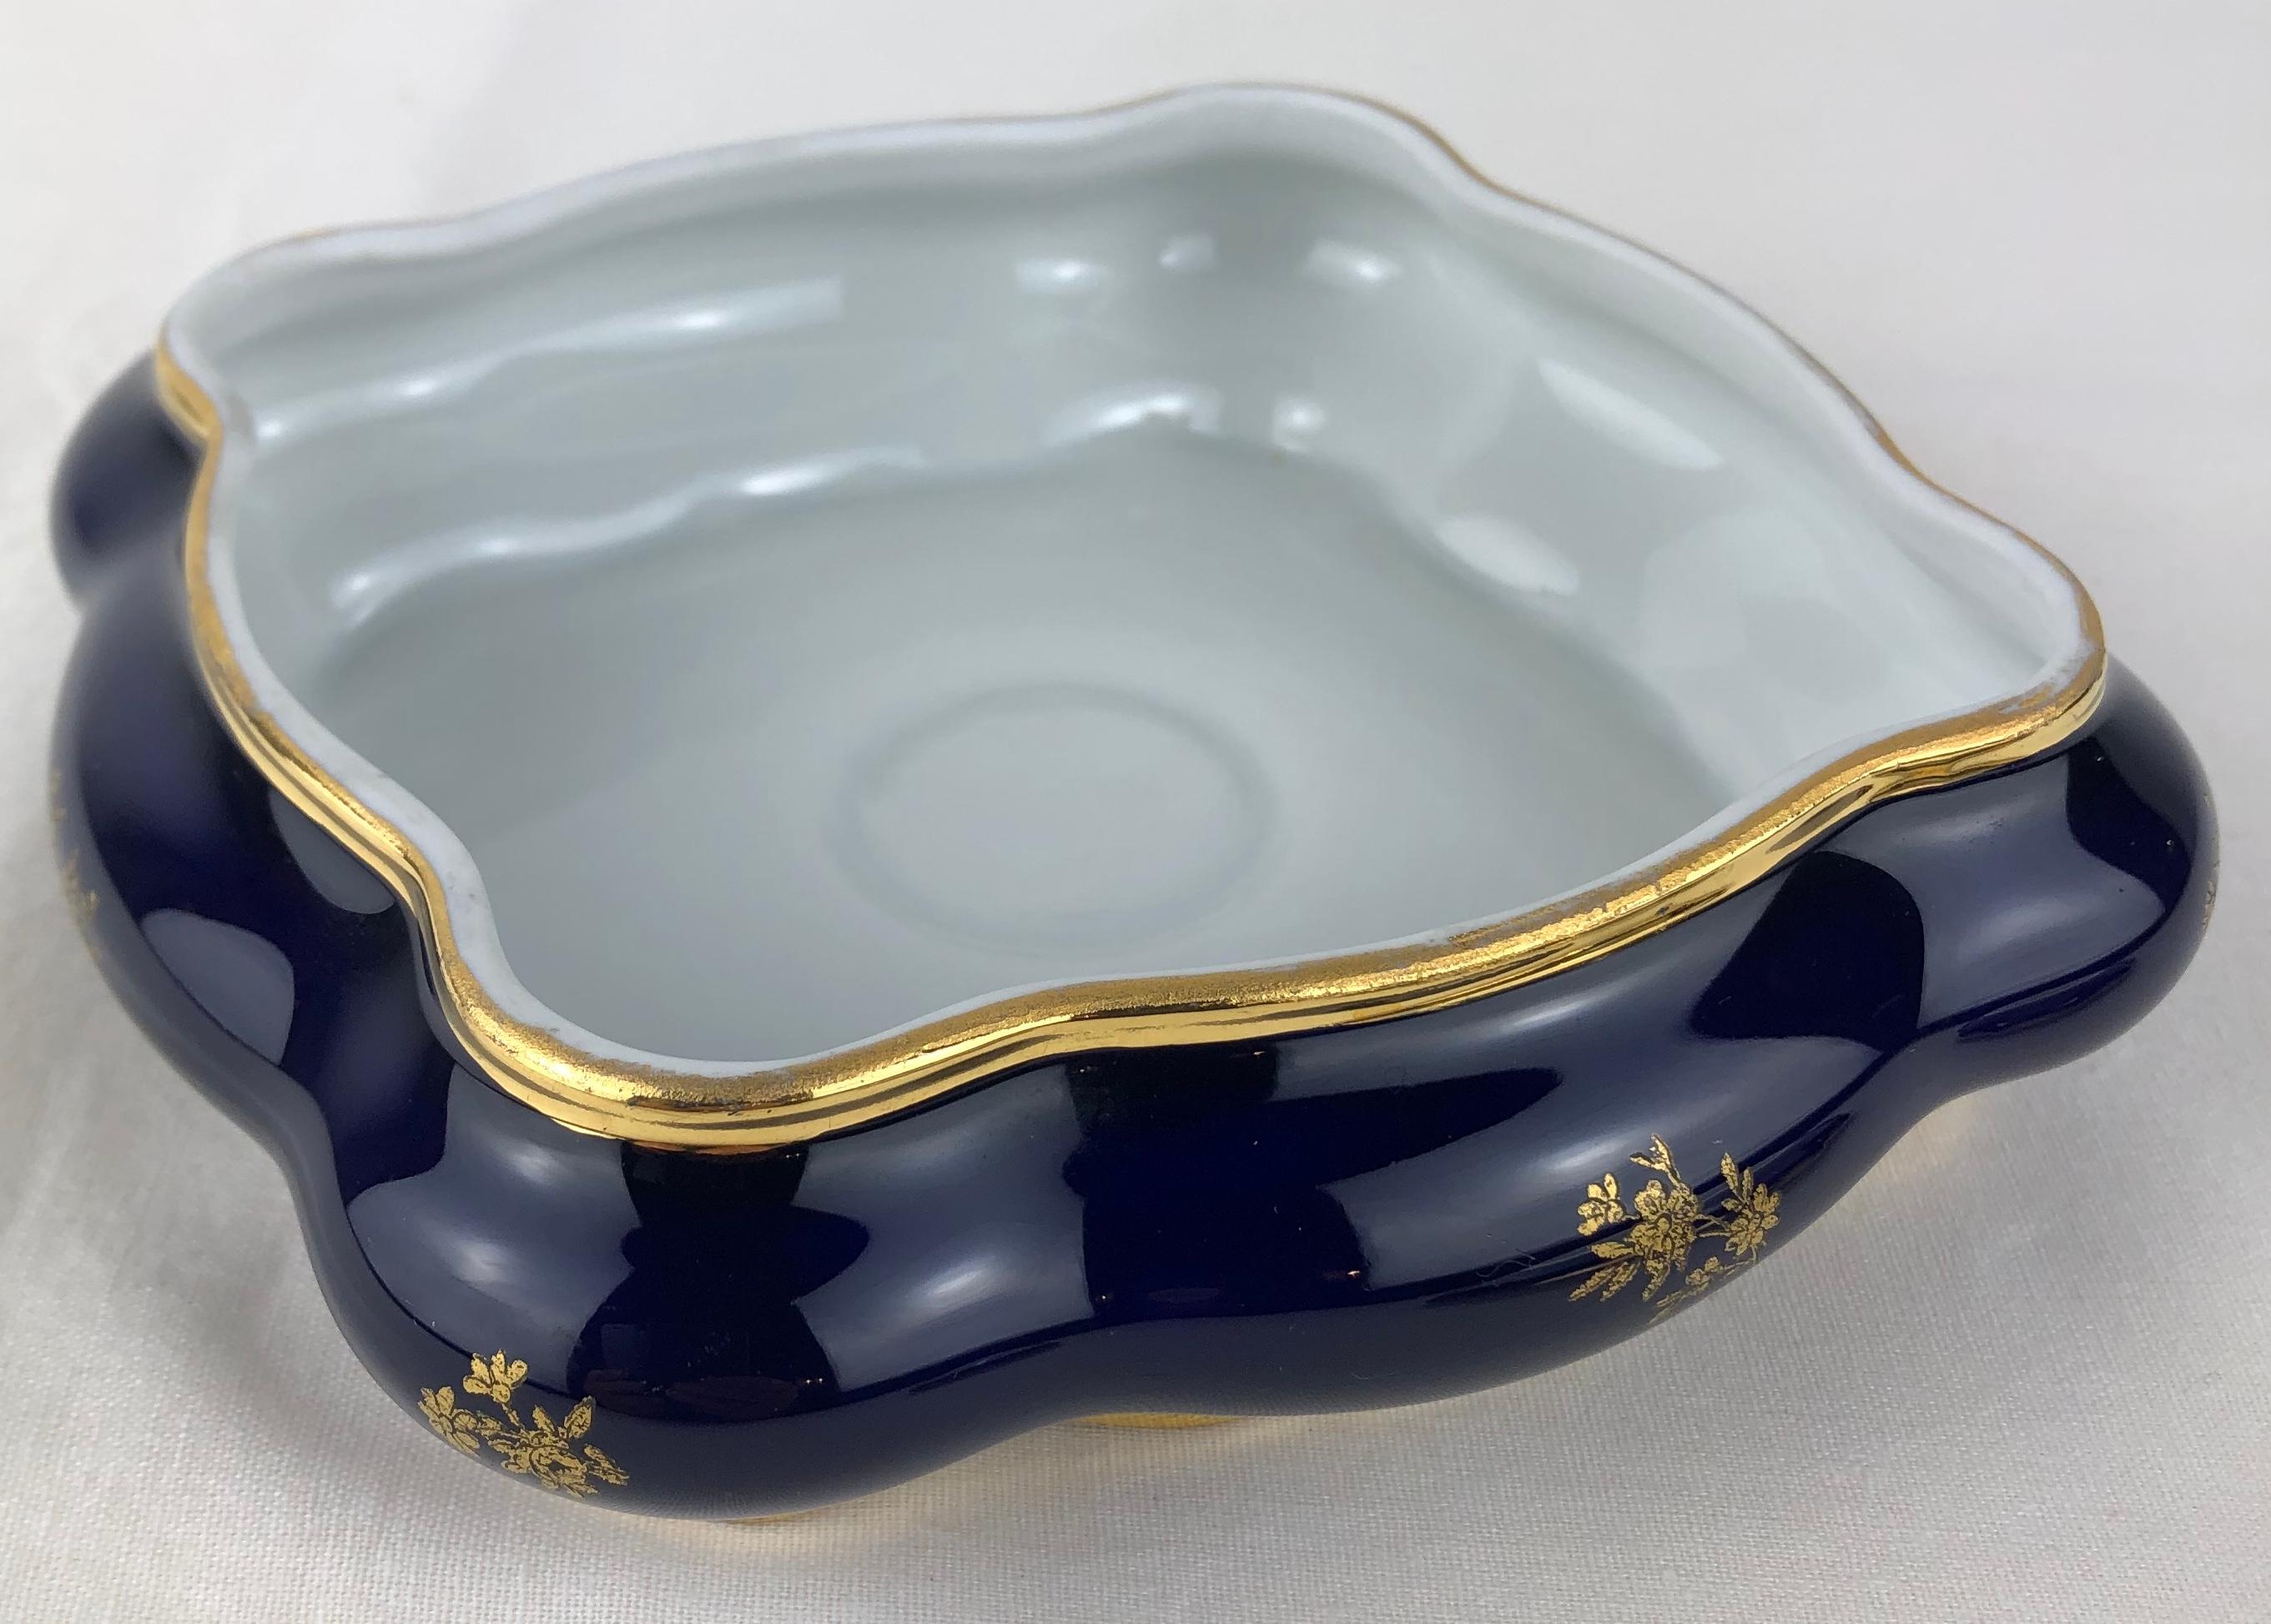 Limoges Porcelain Lidded Candy Dish Trinket or Jewelry Box French For Sale 1